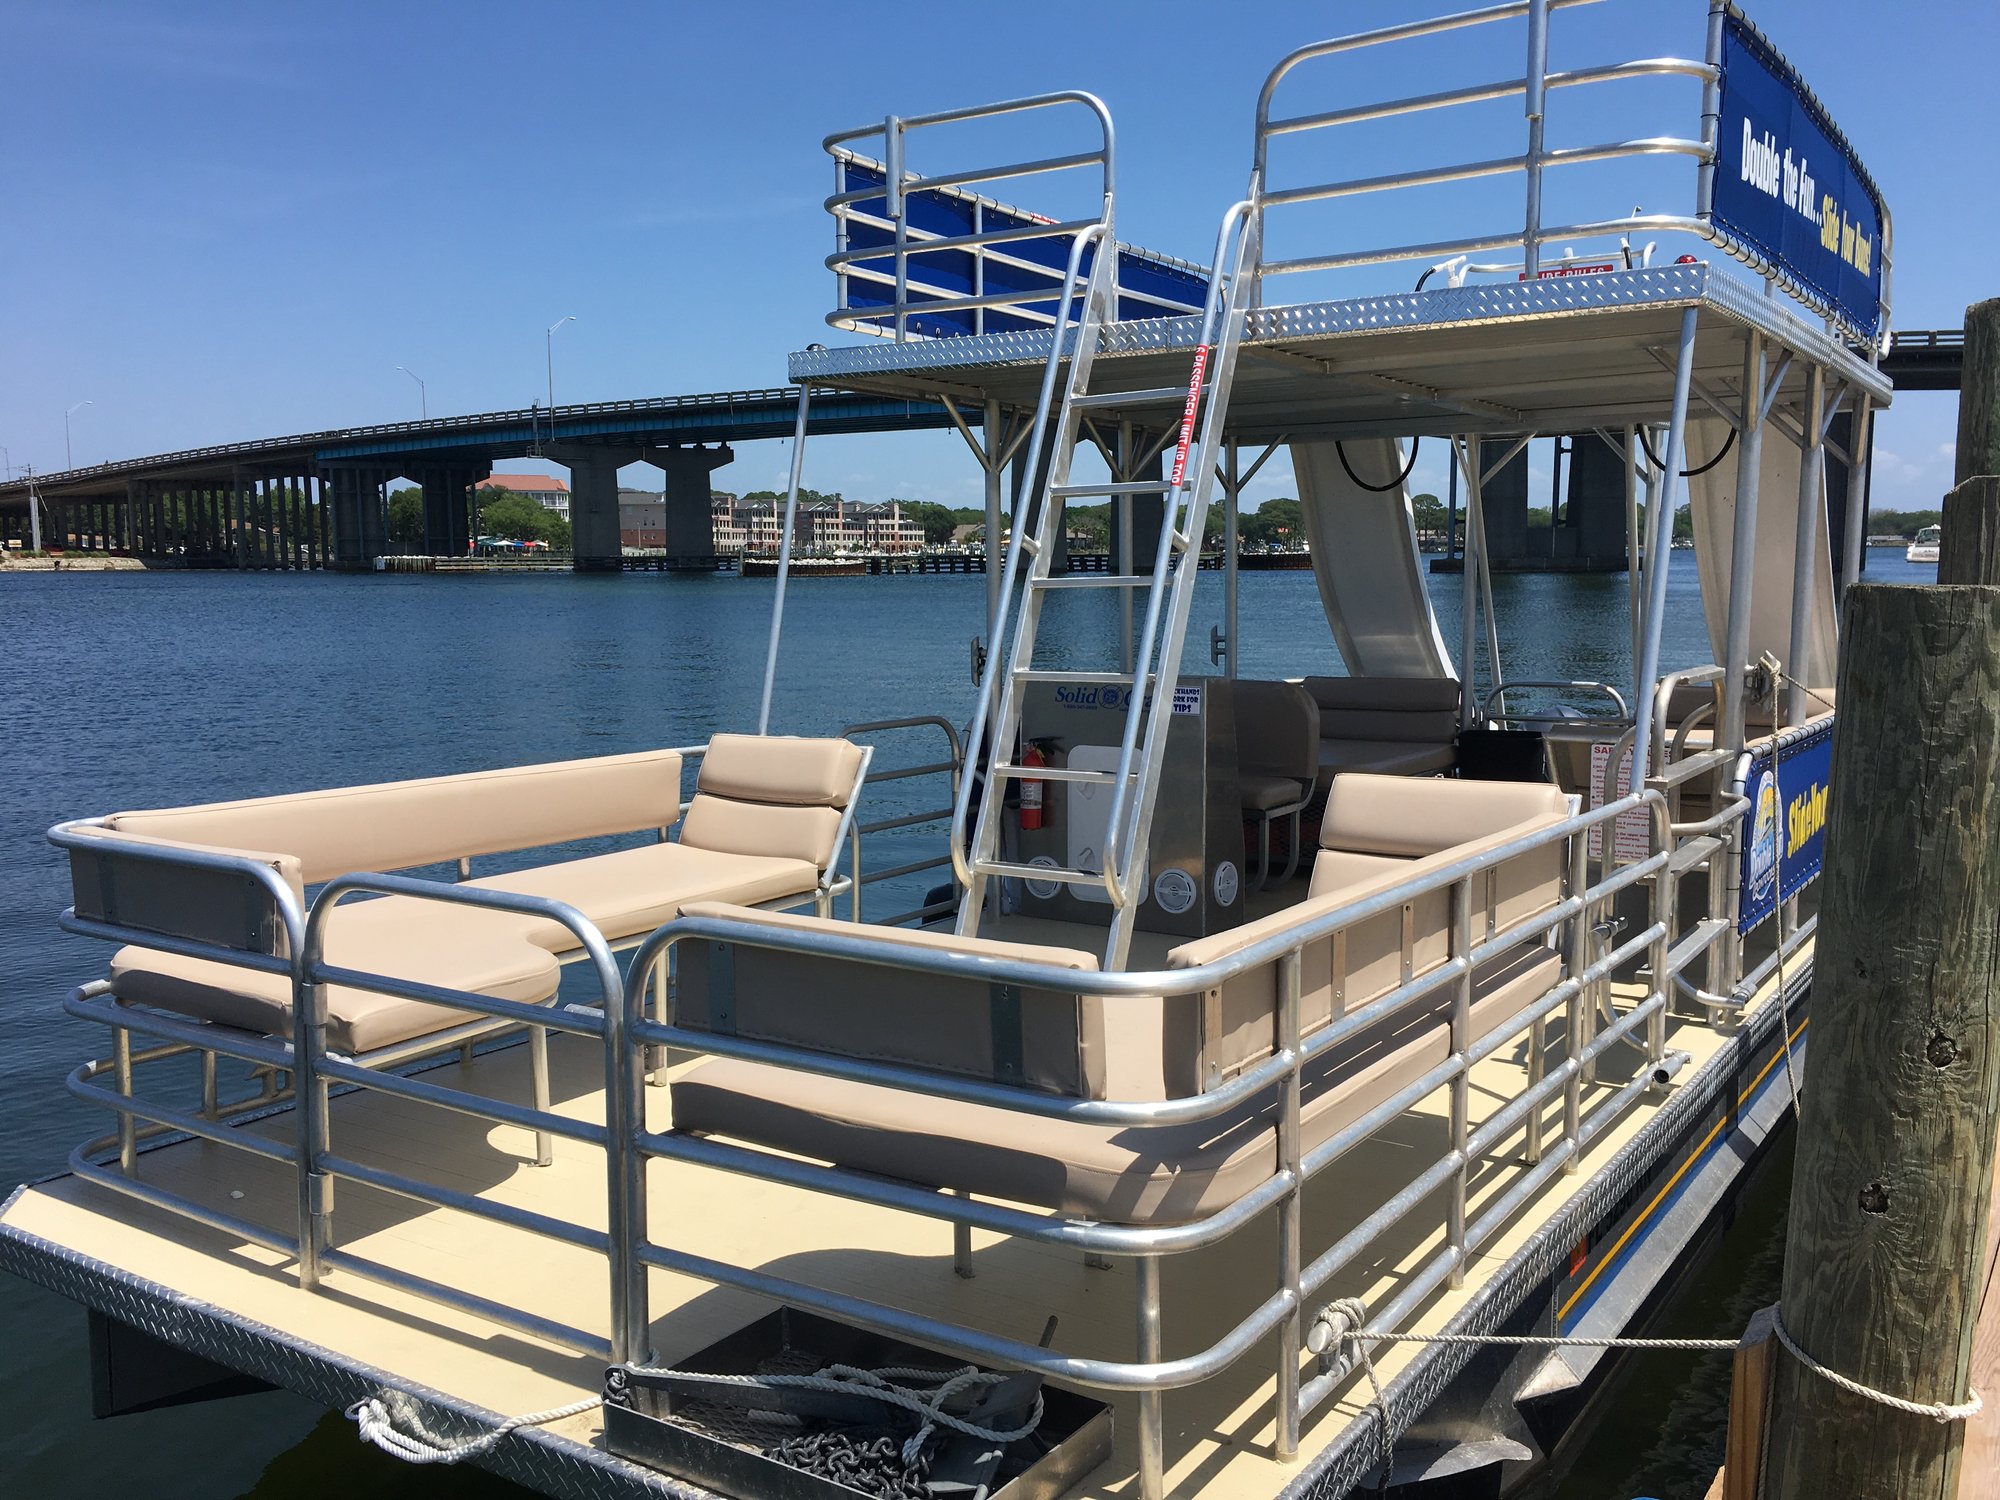 double decker pontoon boat with two slides in destin florida